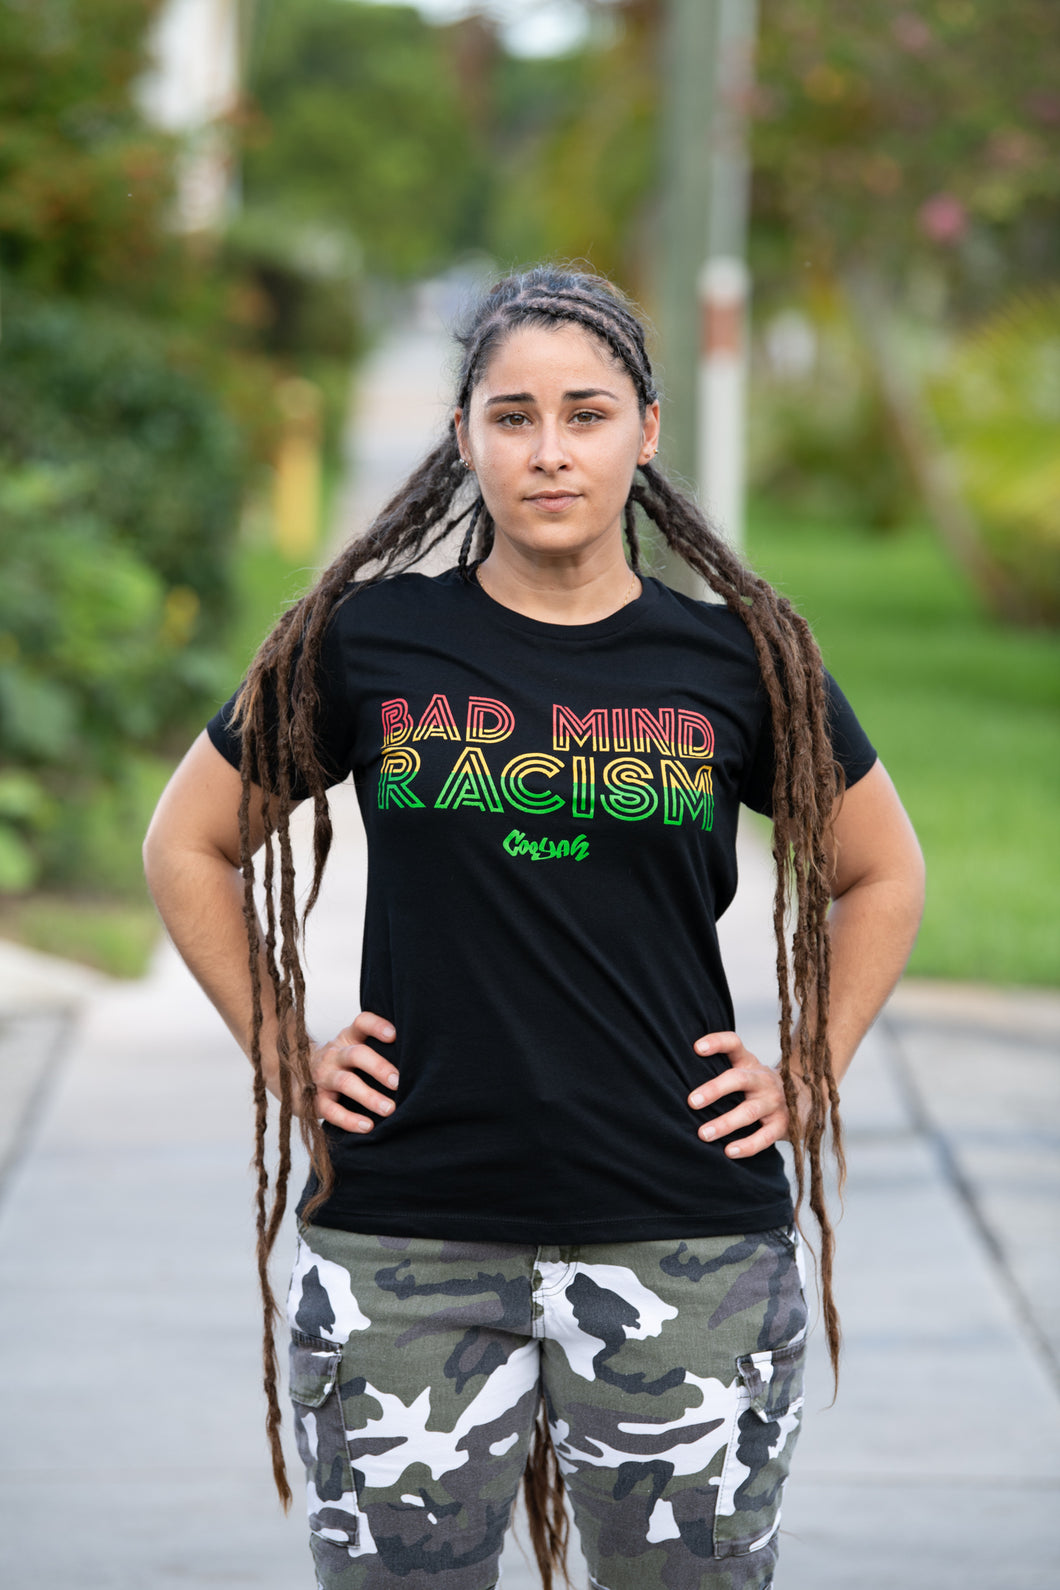 Women’s T-Shirt with Badmind Racism Graphic